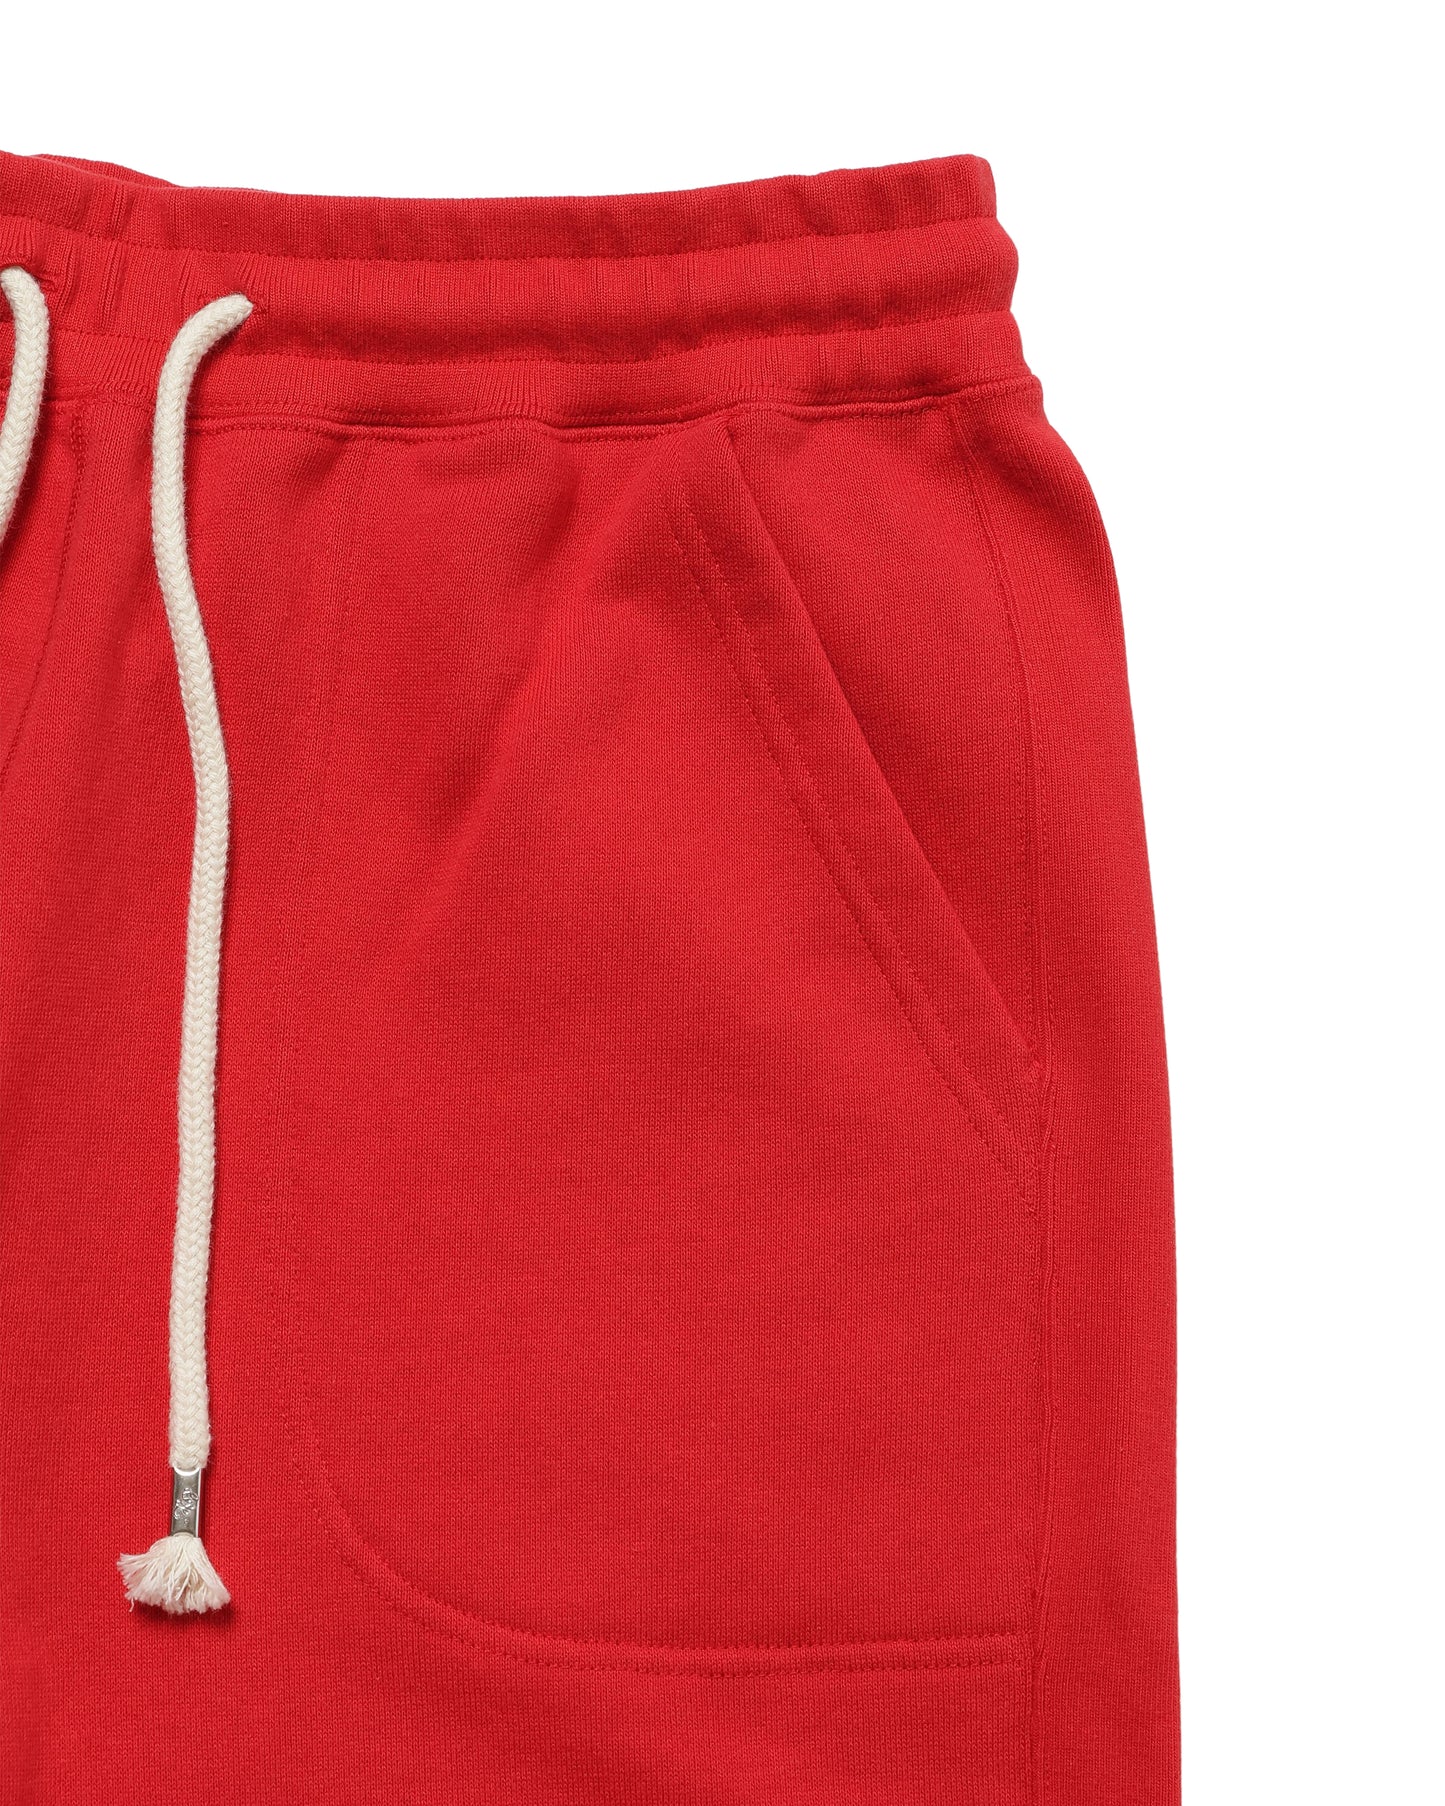 Sweat Shorts - Super Looper French Terry - Red | Wonder Looper